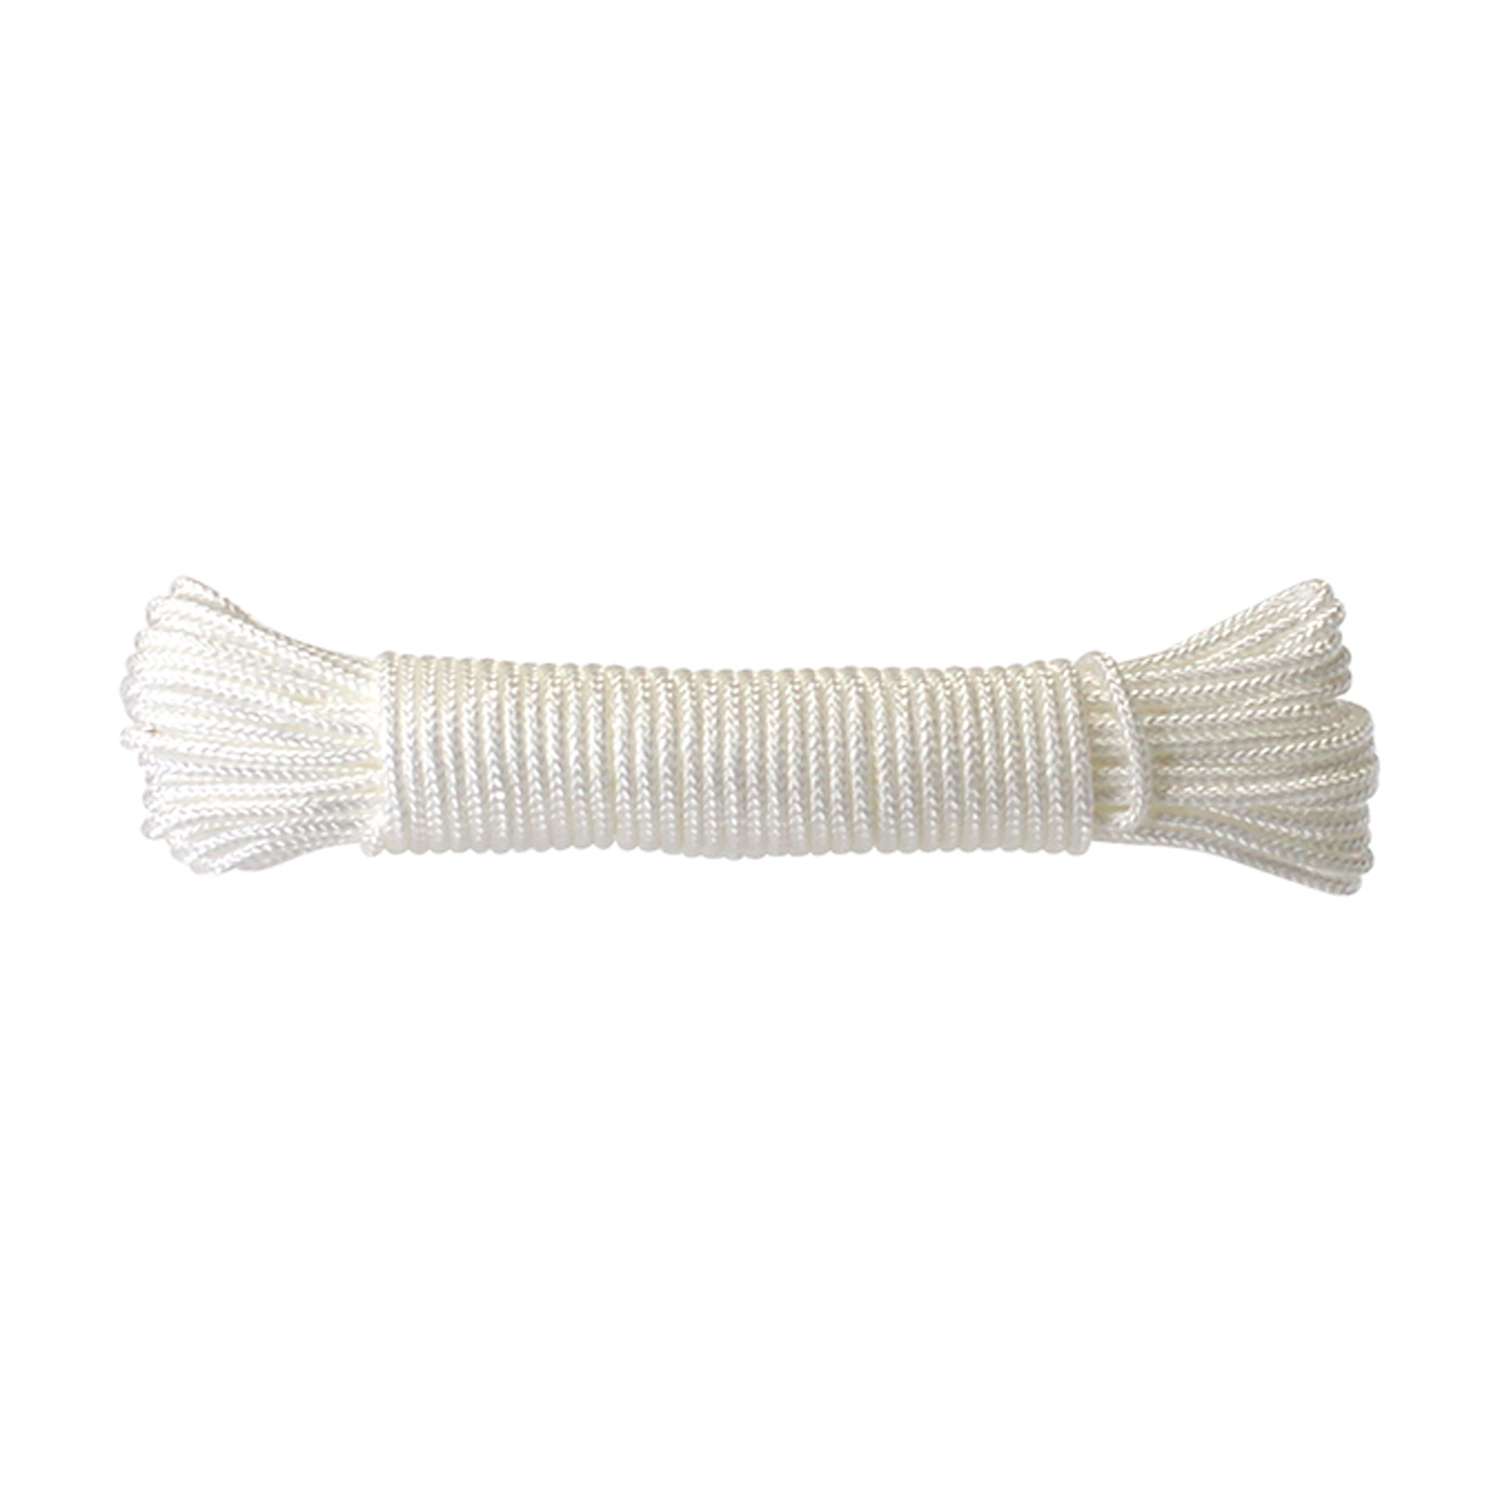 Ace 1/8 in. D X 48 ft. L White Braided Nylon Rope - Ace Hardware